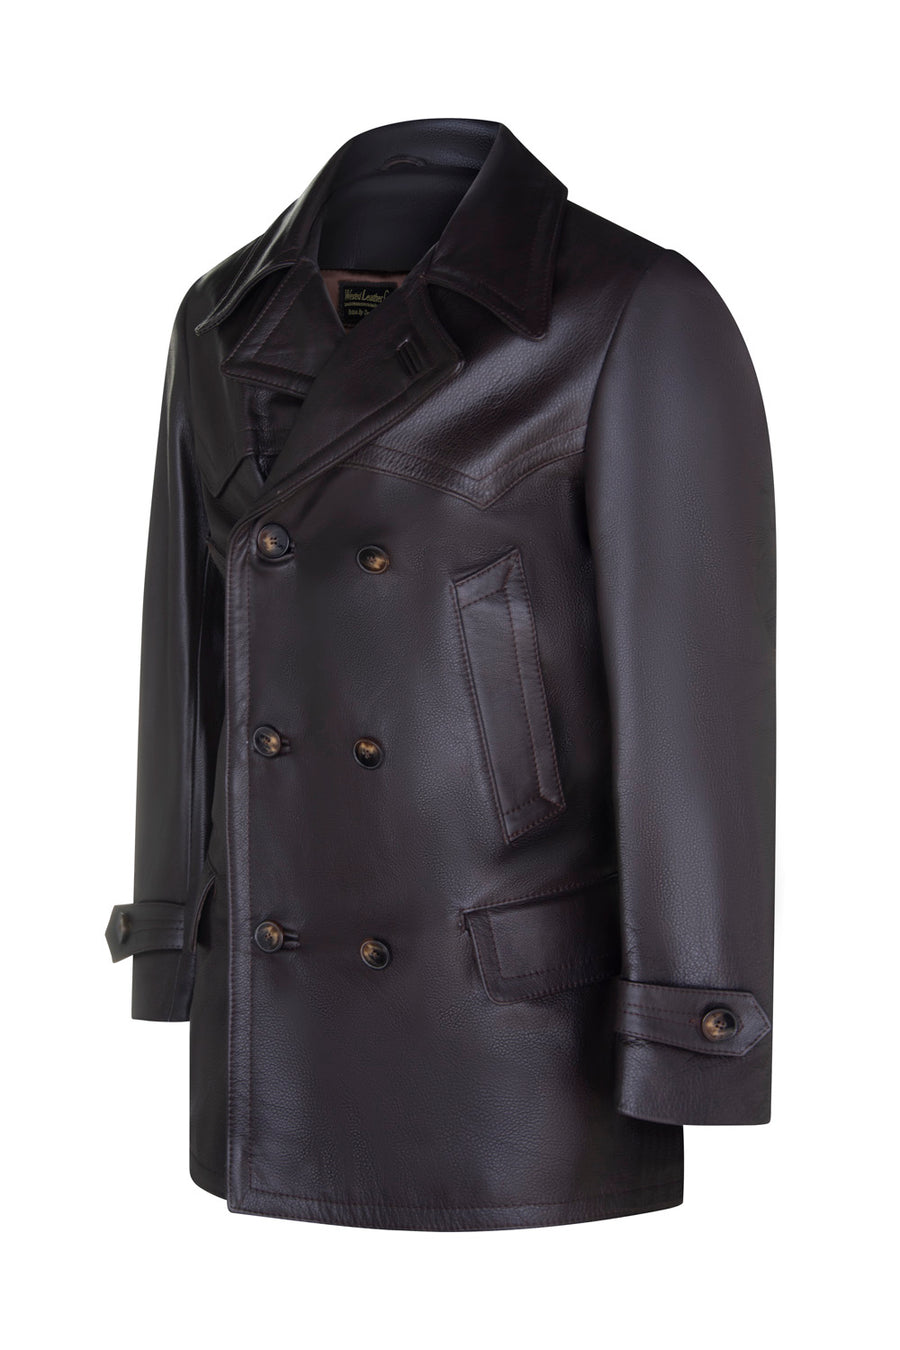 German U Boat Jacket as used in Dr Who – Wested Leather Co